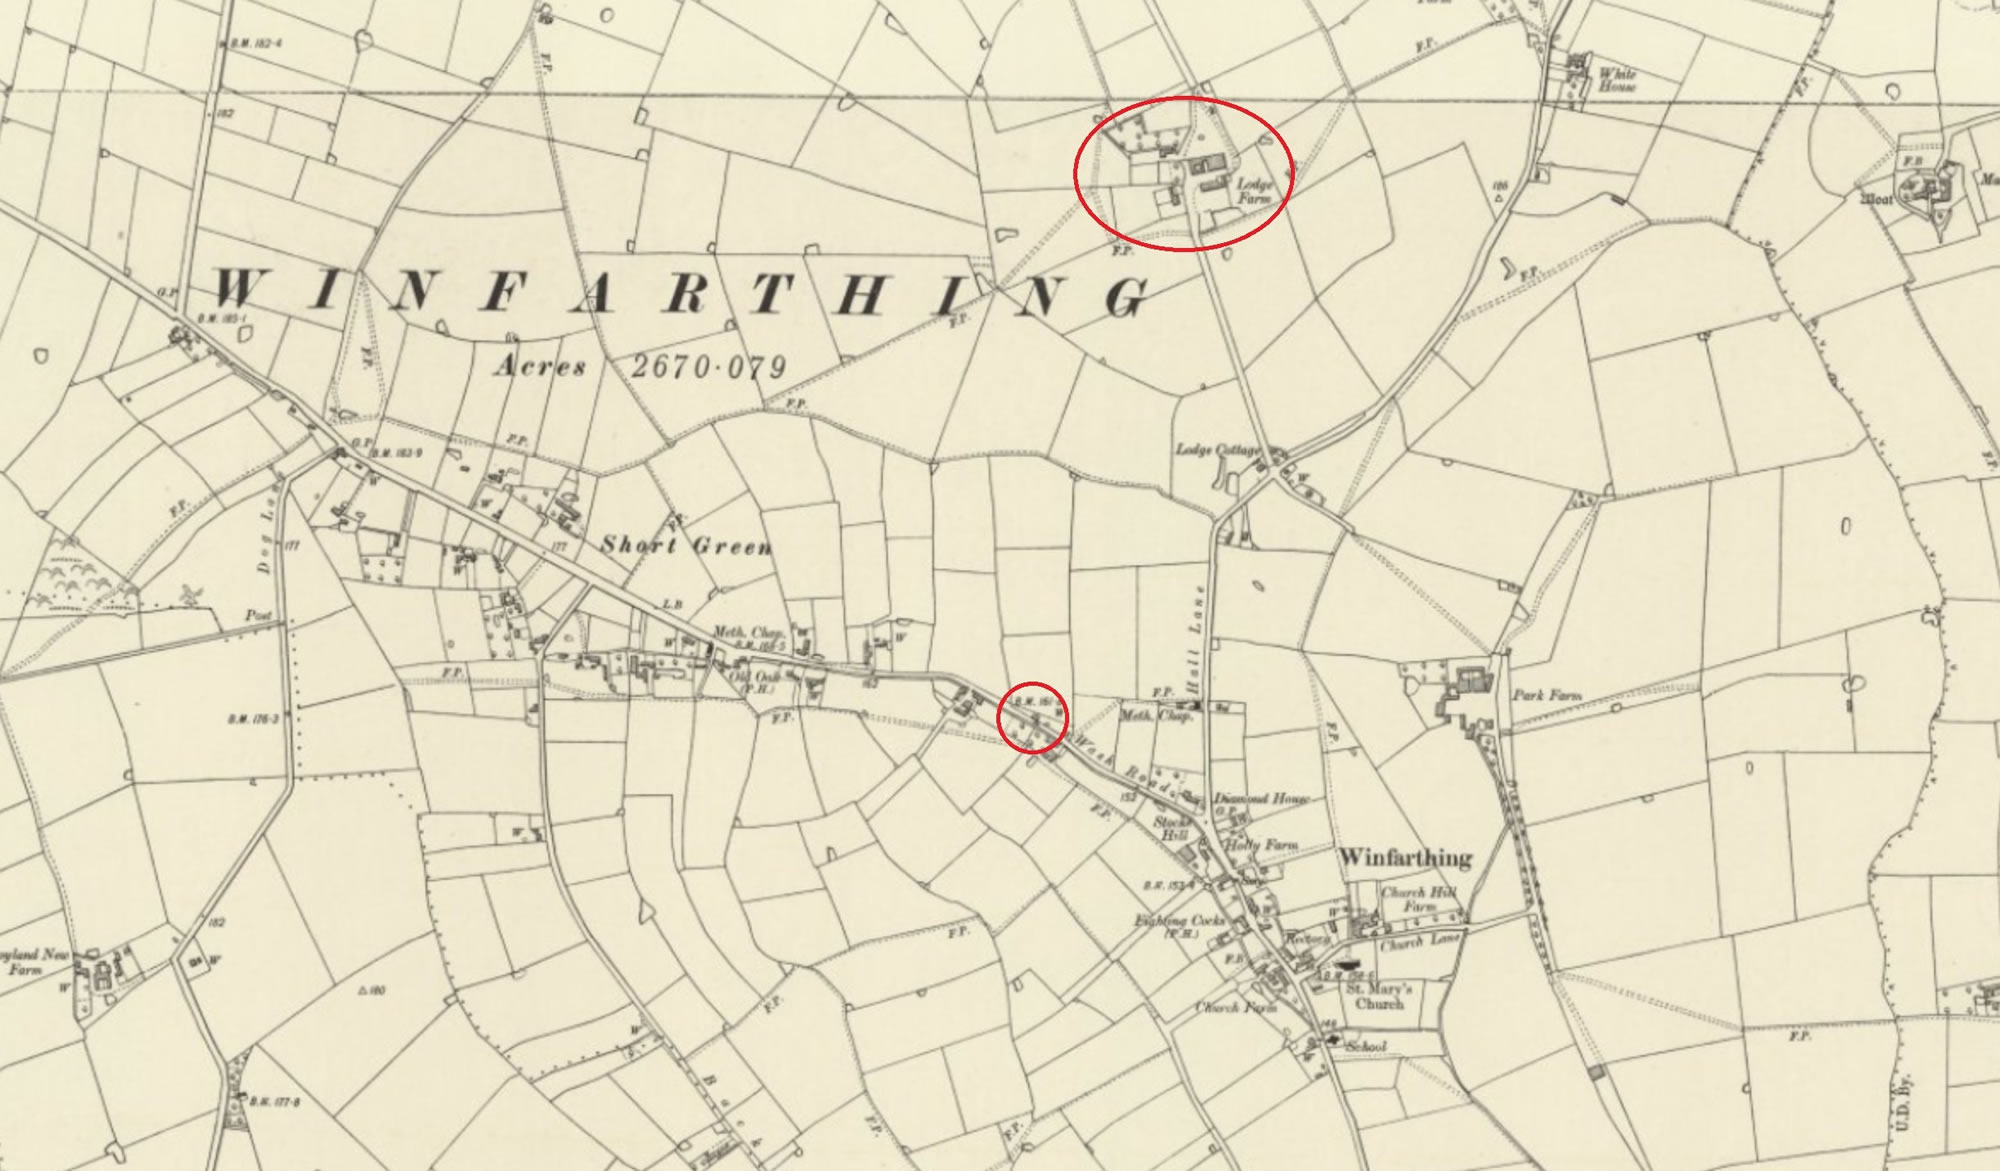 Winfathering Lodge Farm at the top of the OS map and its relationship to Christopher's home